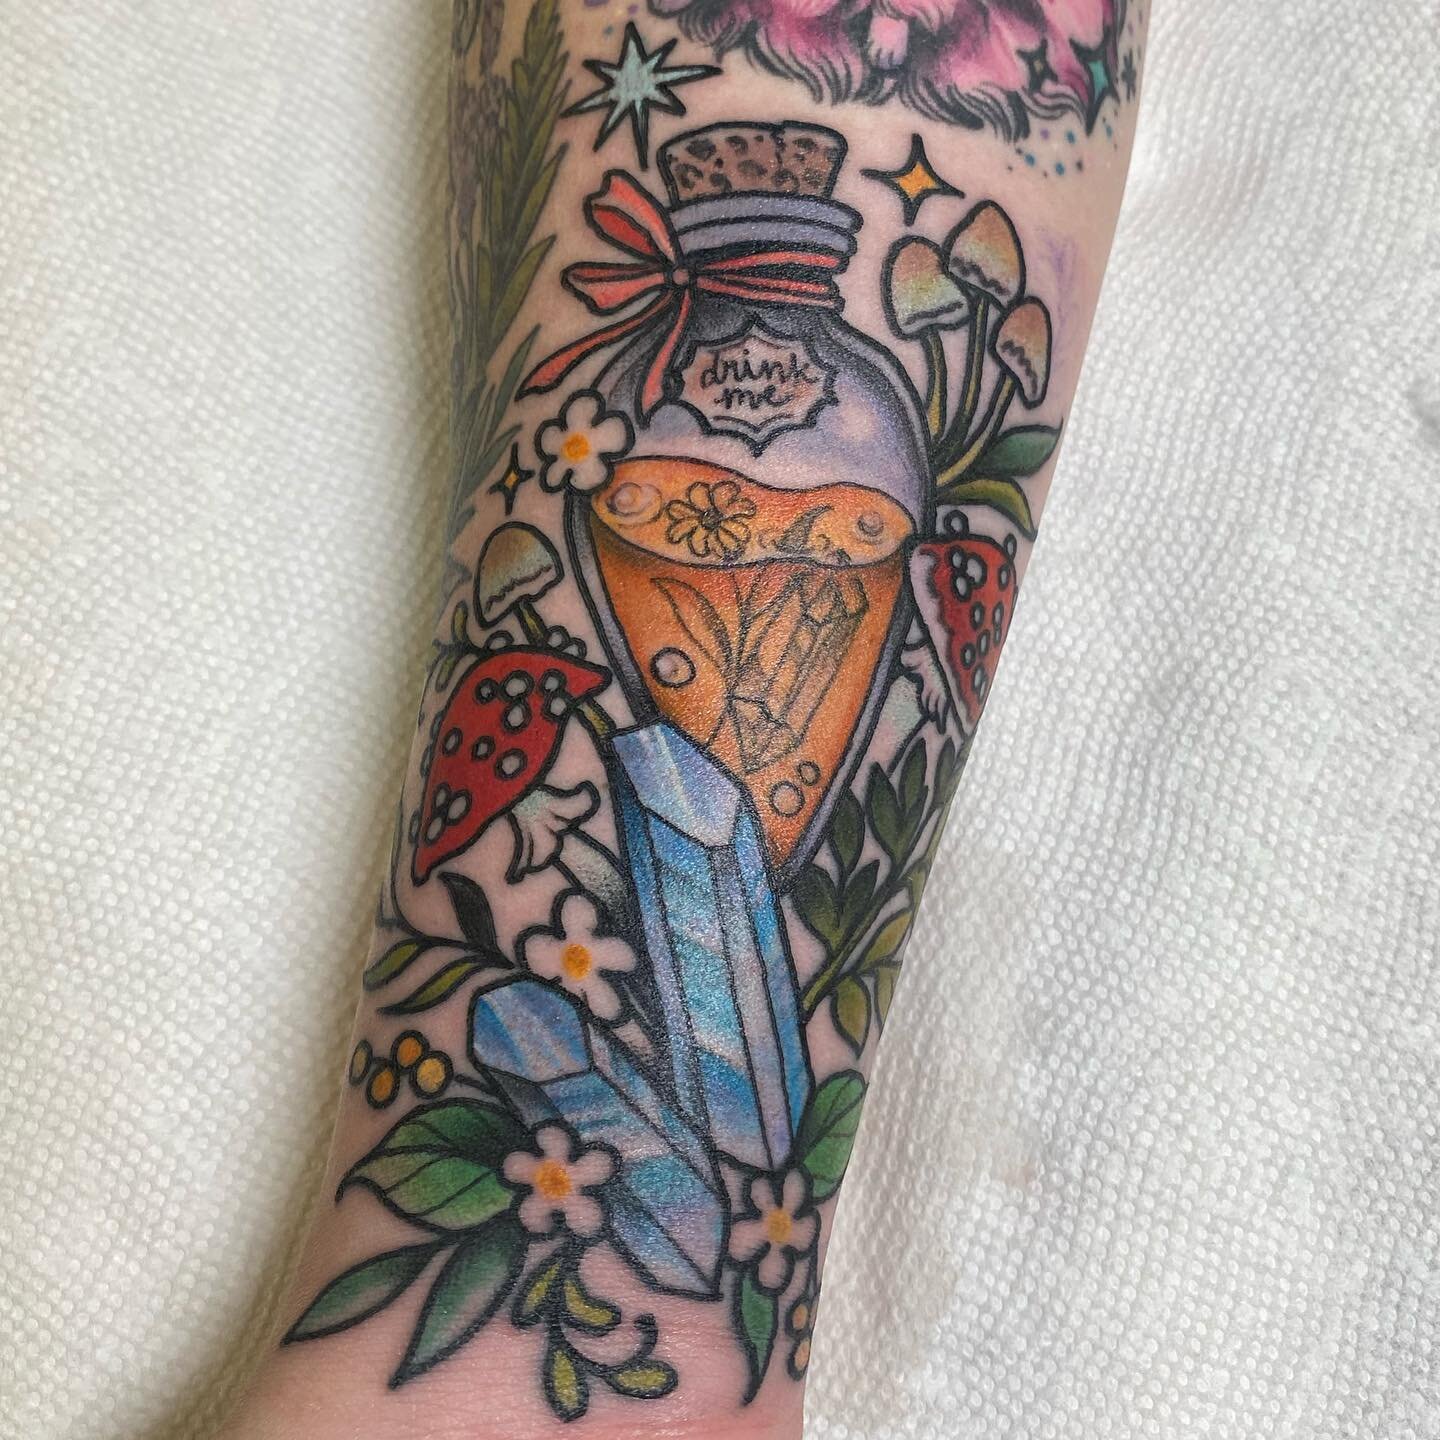 Squeezed this little potion bottle in between some healed tattoos I did on Jessi&rsquo;s wrist! Thank you and happy birthday @jessisimps 
@whitedogtattooky